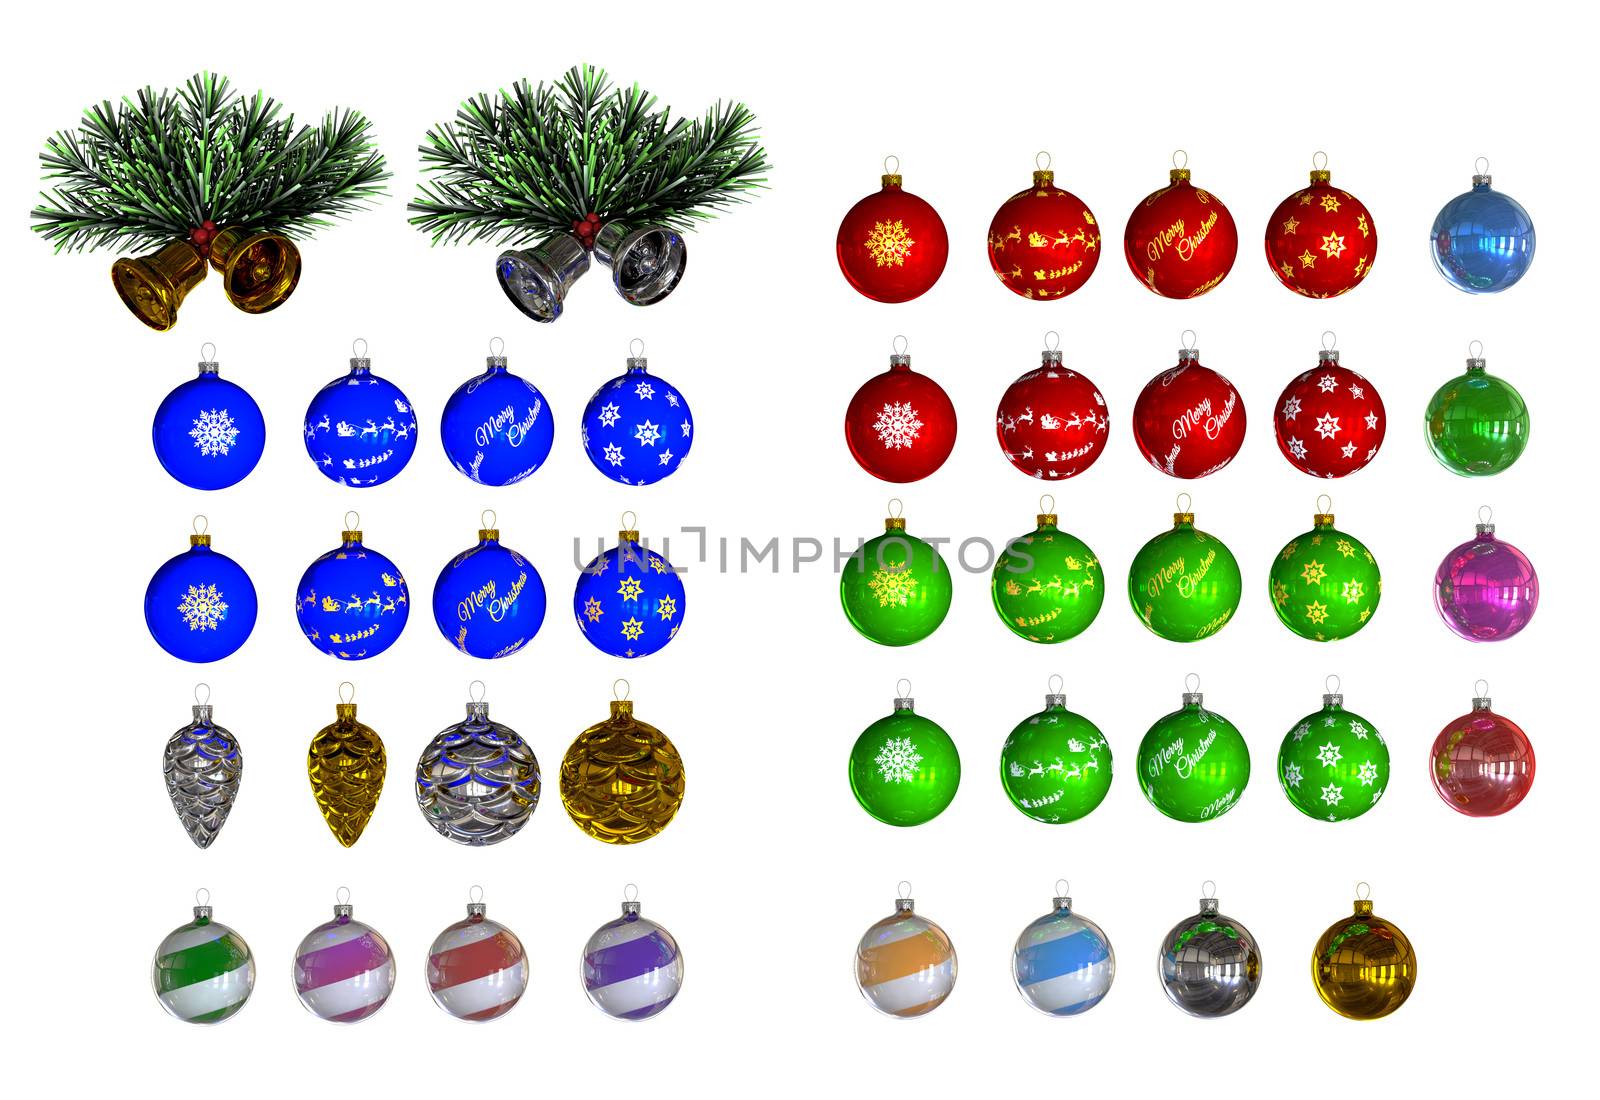 3D Christmas decorations designed with clipping path